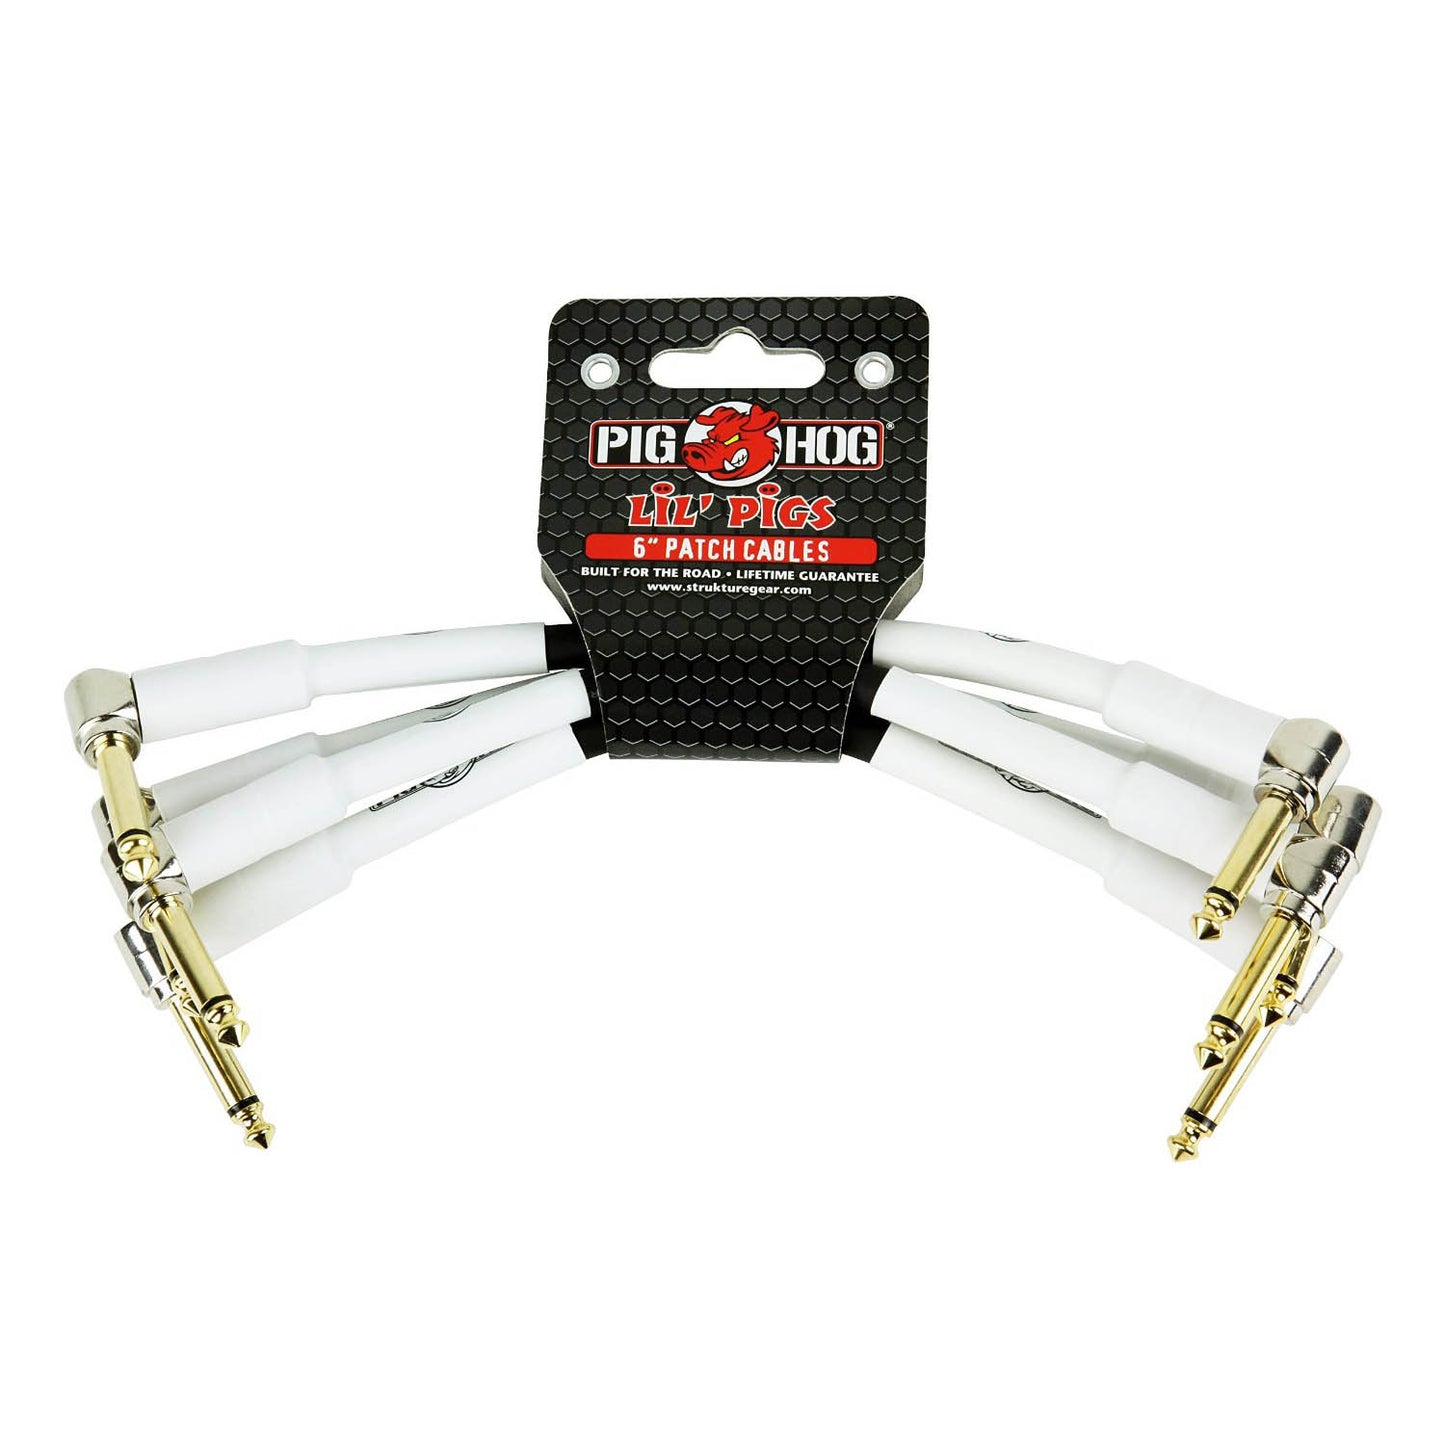 Pig Hog Phlil Lil Pigs 1/4"" to 1/4"" Right-Angled 6" Patch Cables - 4-Pack